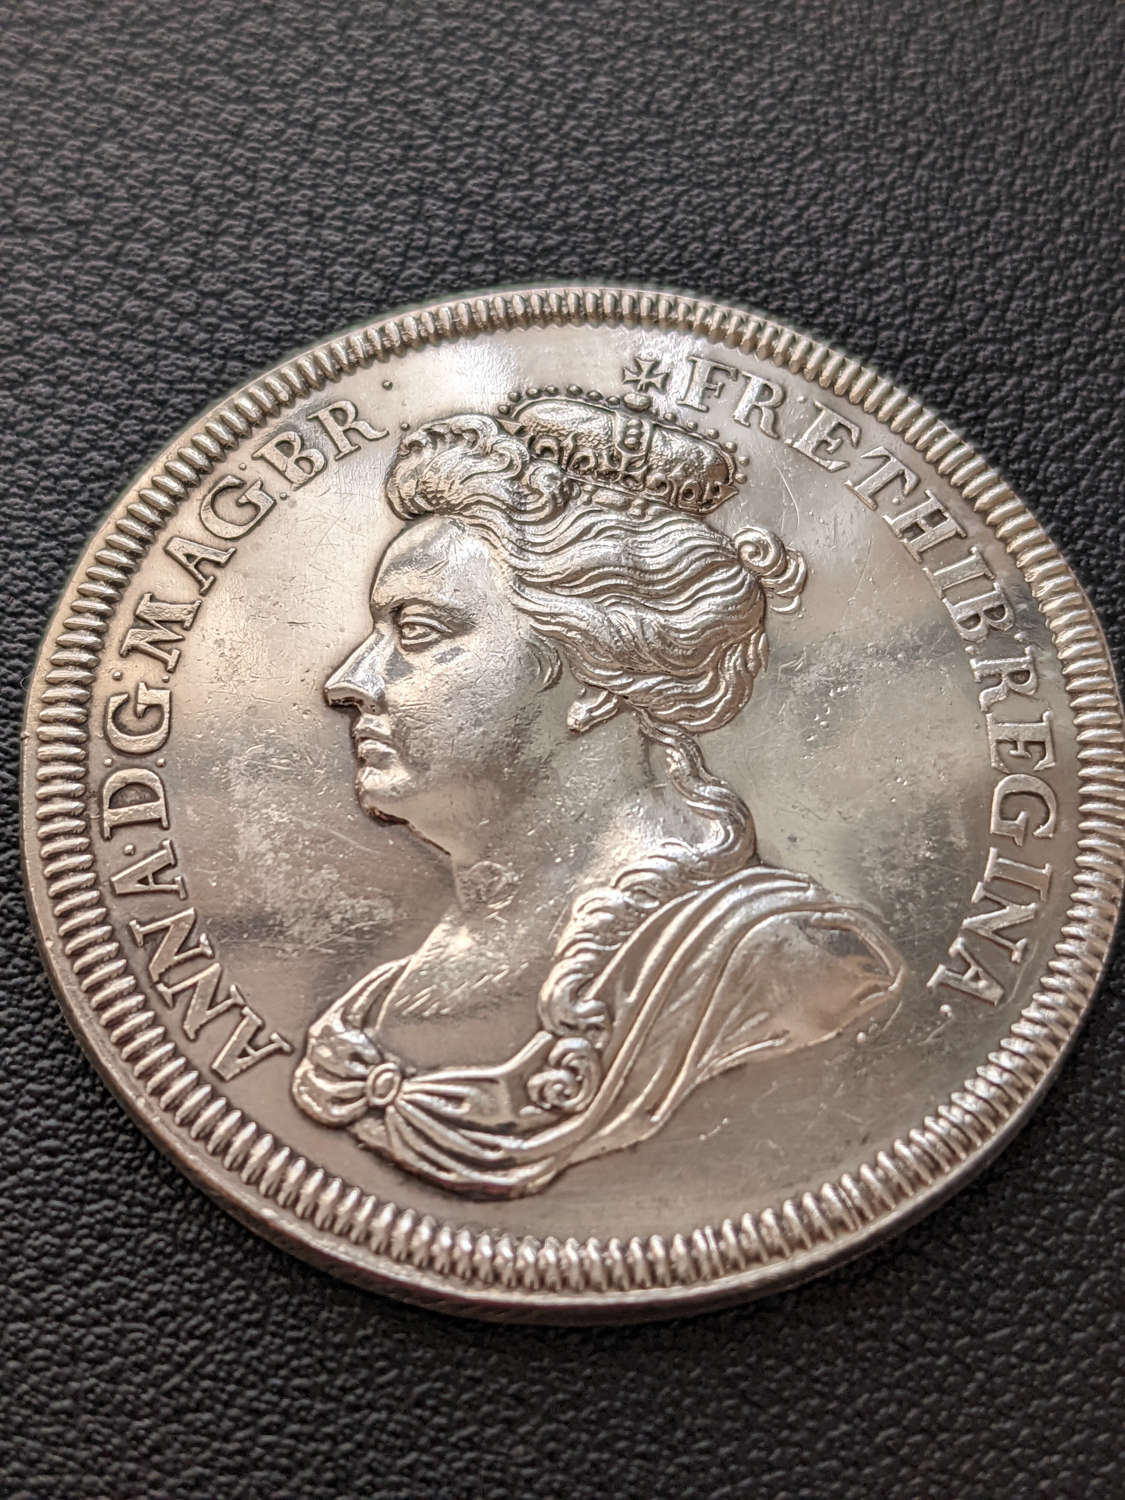 Union of England and Scotland, 1707, Silver Medallion by John Croker